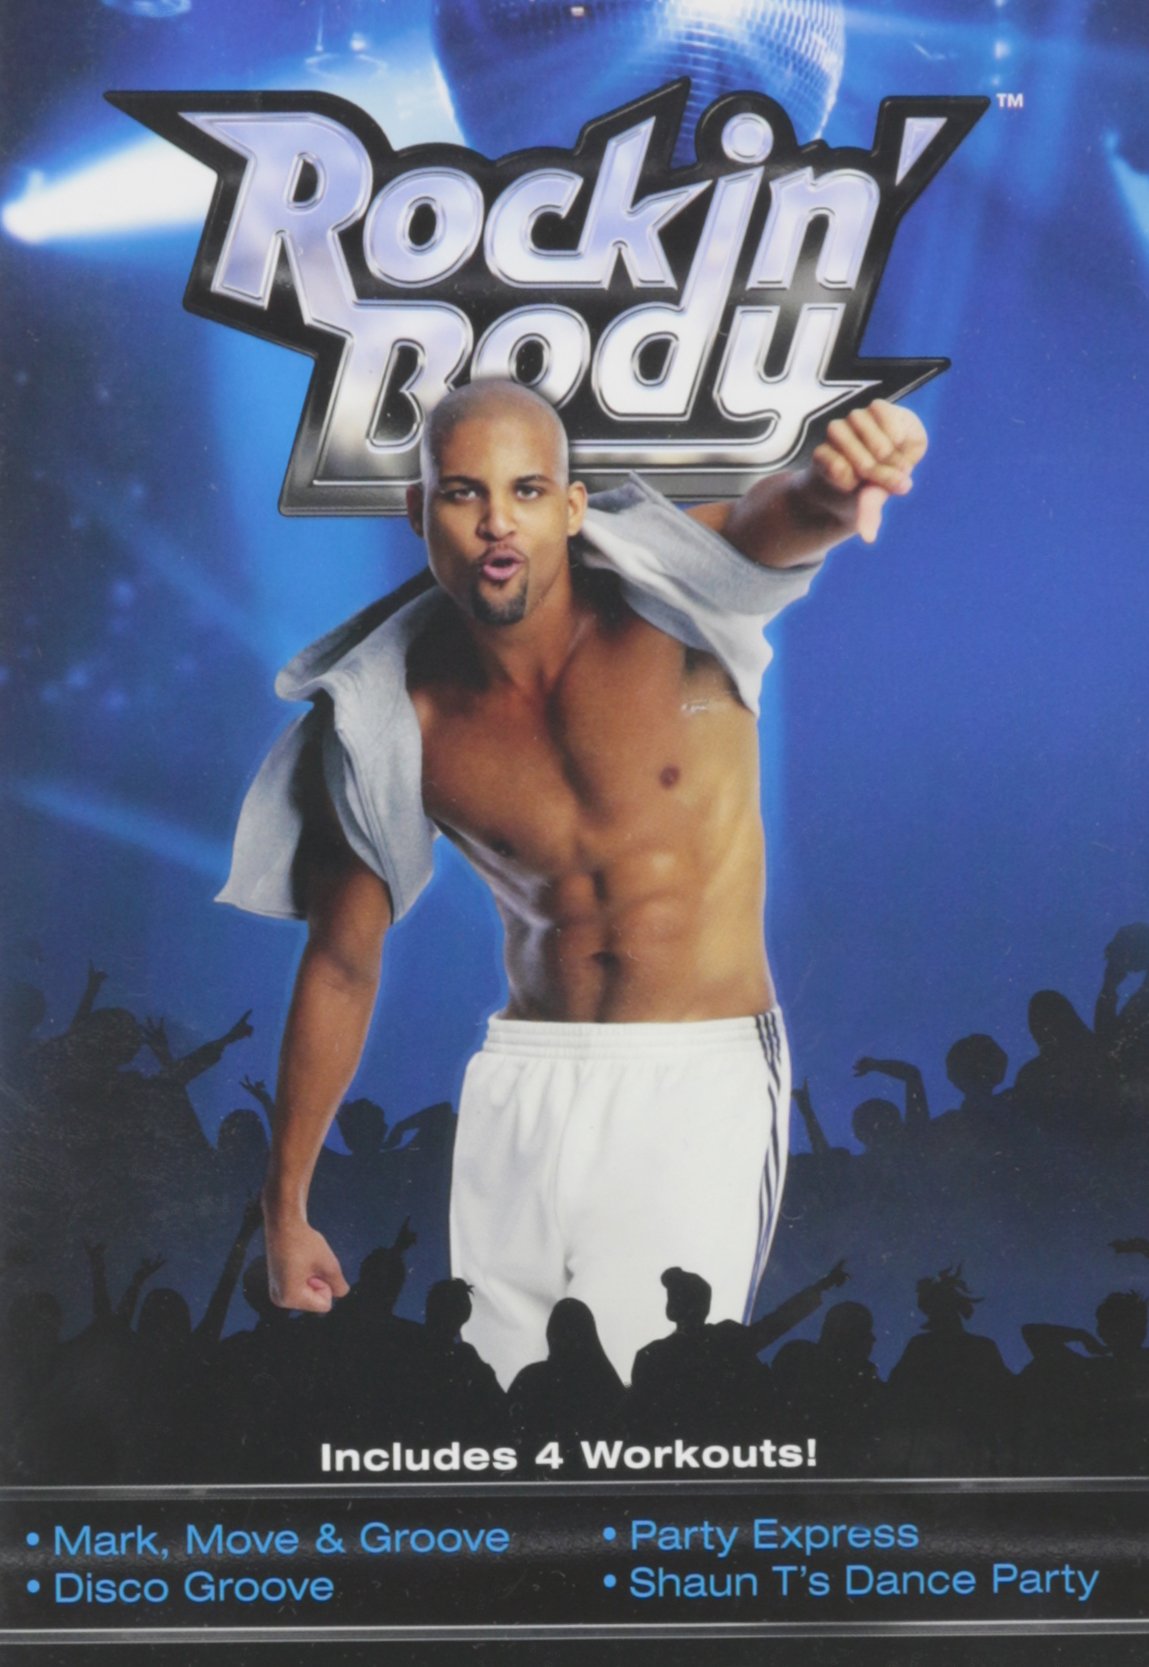 Beachbody Shaun T's Rockin' Body DVD Workout, Dance Workout DVDs, Exercise Videos, Dancing Fitness Guide for Beginners, Seniors, Easy To Follow, Low Impact, 5 Workouts Included